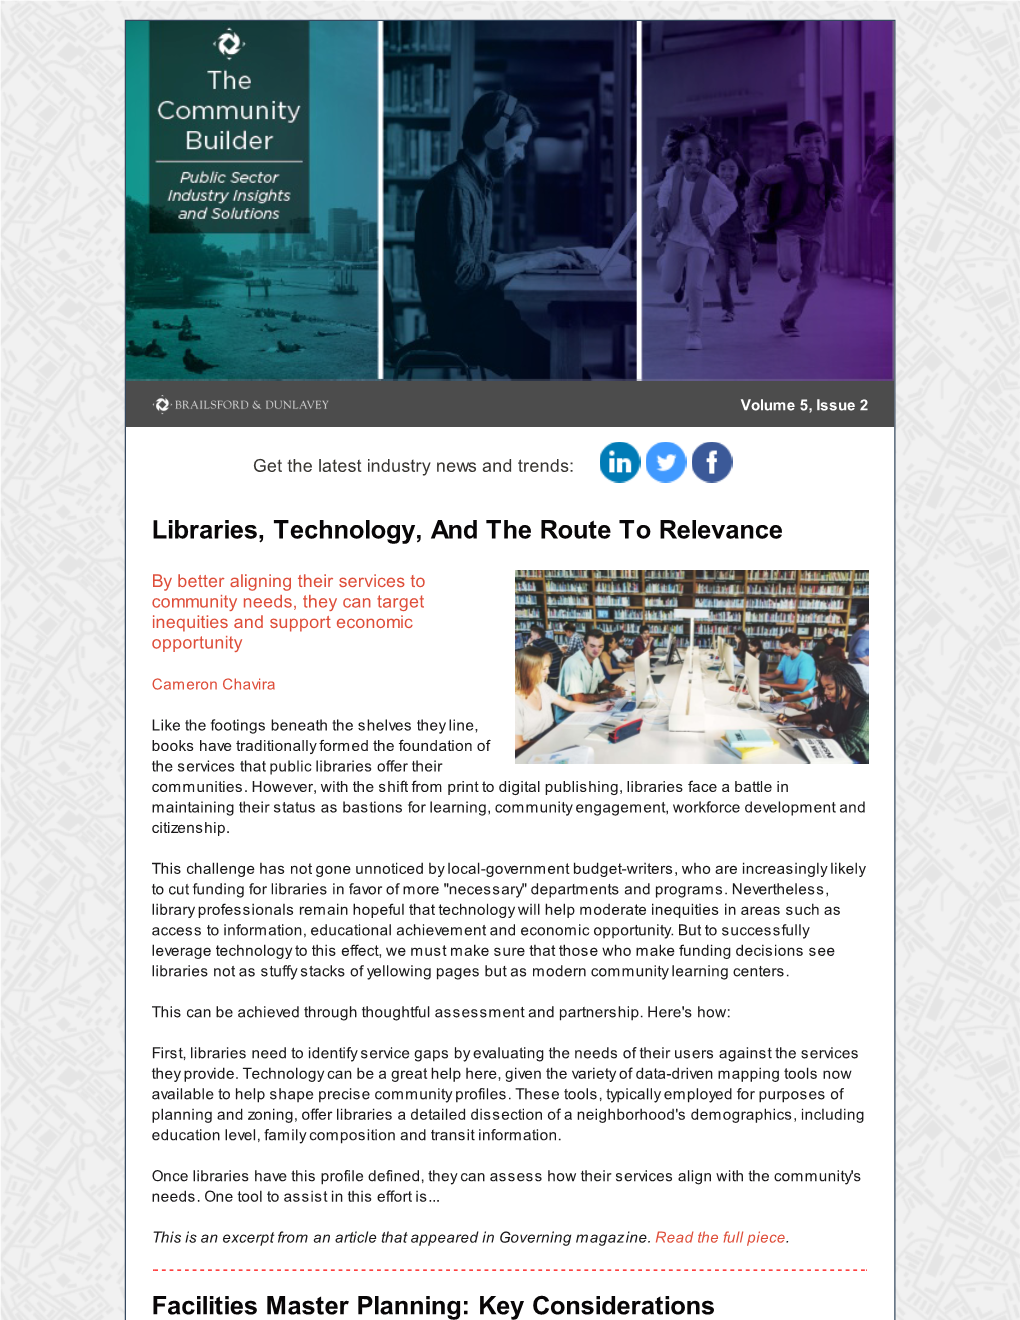 Libraries, Technology, and the Route to Relevance Facilities Master